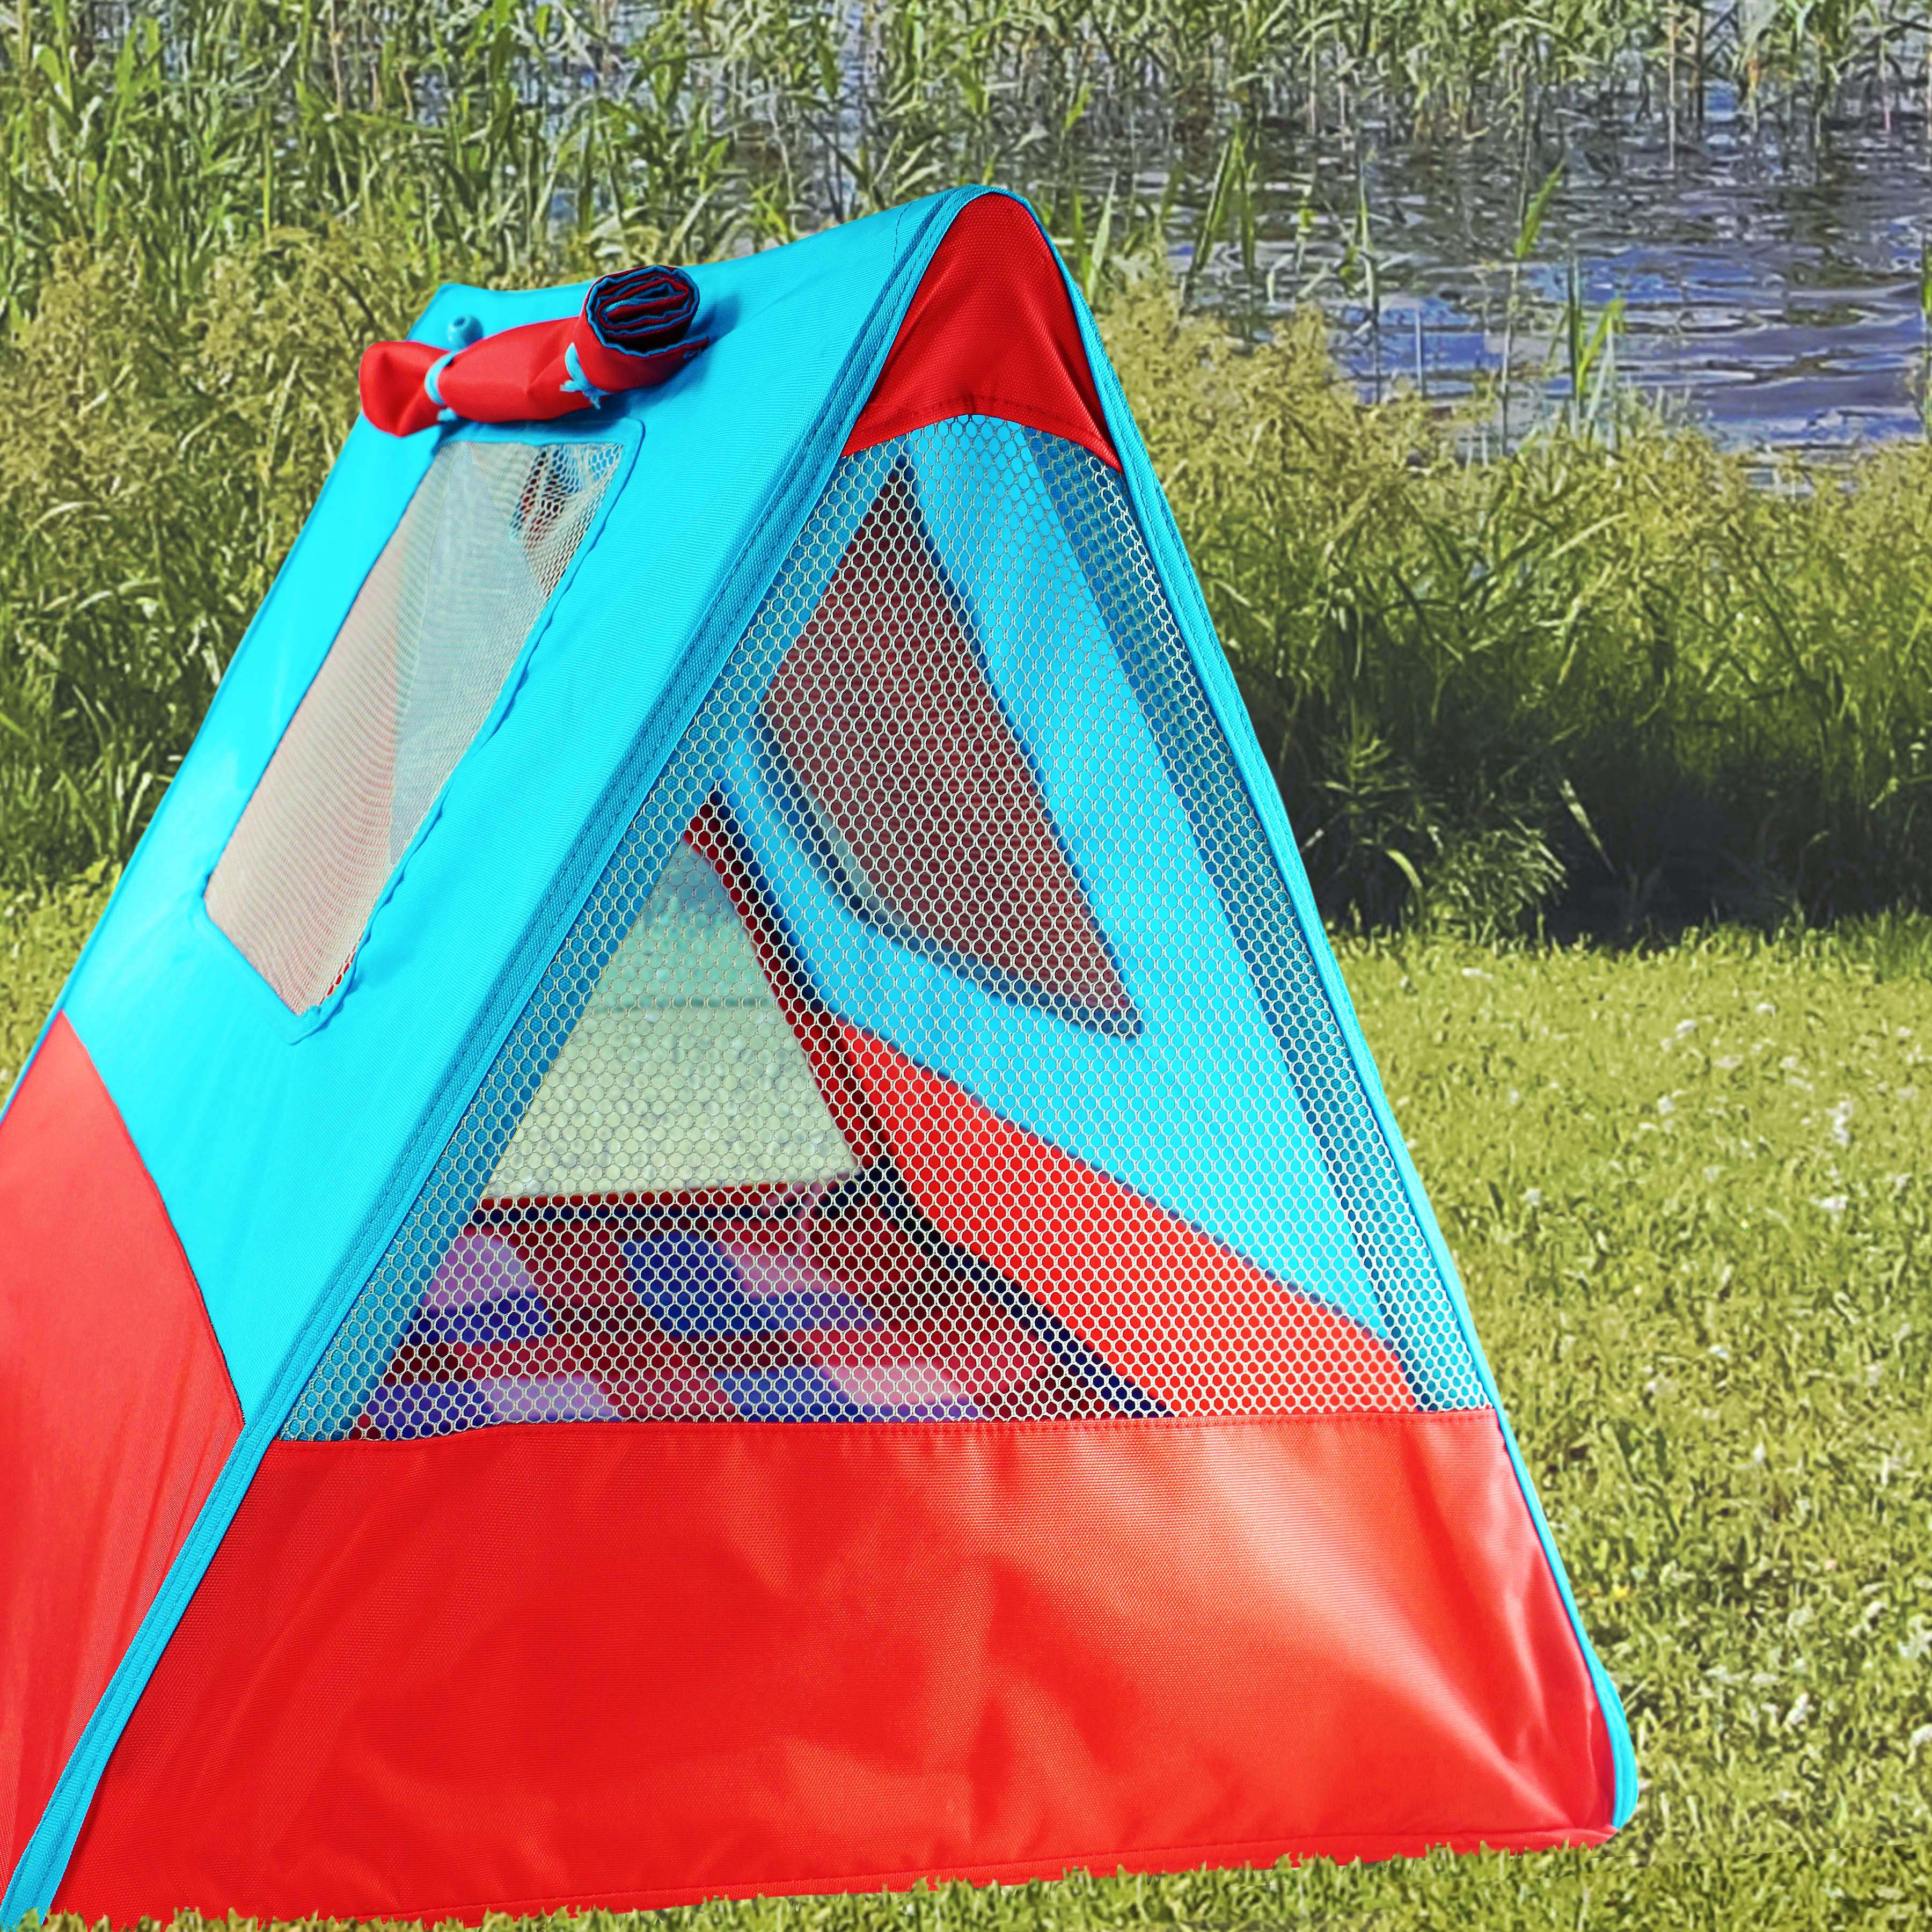 Camping Fun Tent and Sleeping Bags